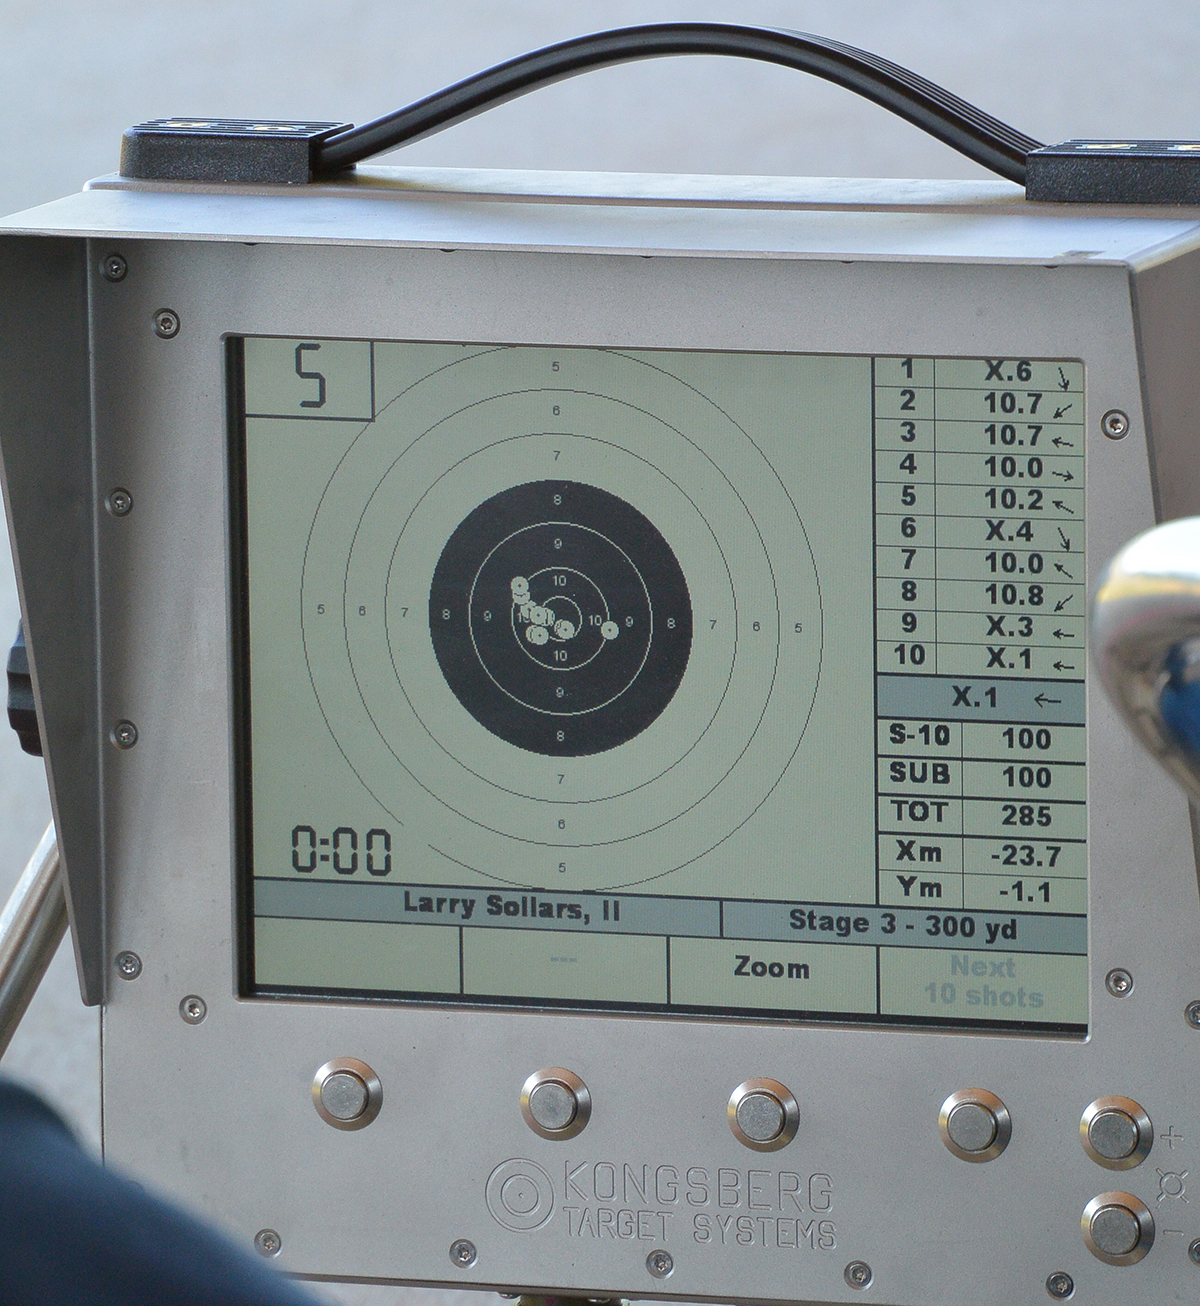 State-of-the-art Kongsberg target systems are installed throughout the CMP Talladega Marksmanship Park. Competitors receive instant feedback for each shot.